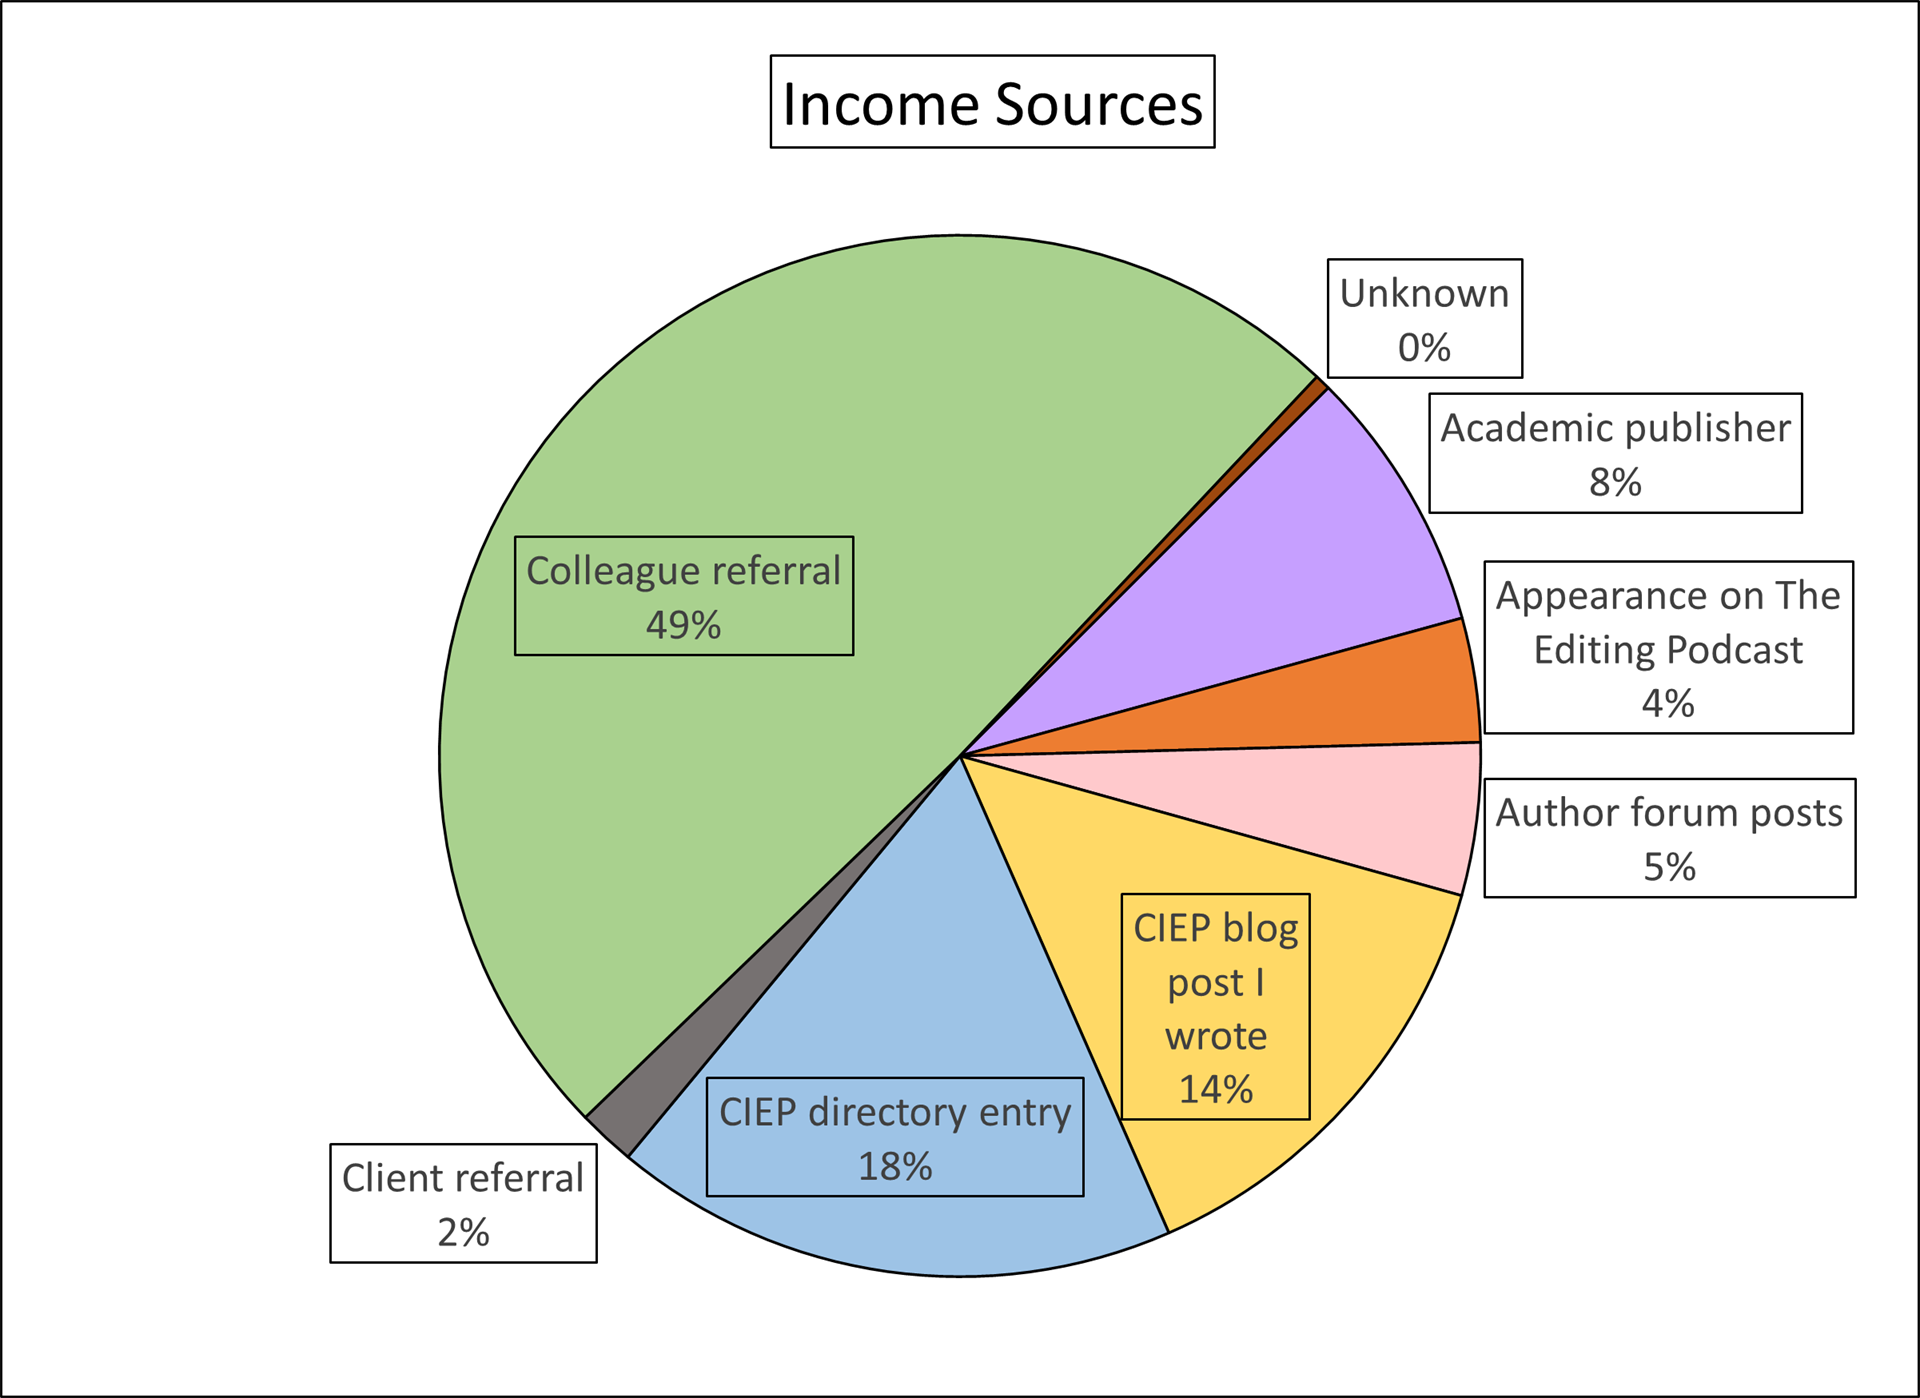 A pie chart with income sources data from The Editor's Affairs (TEA)